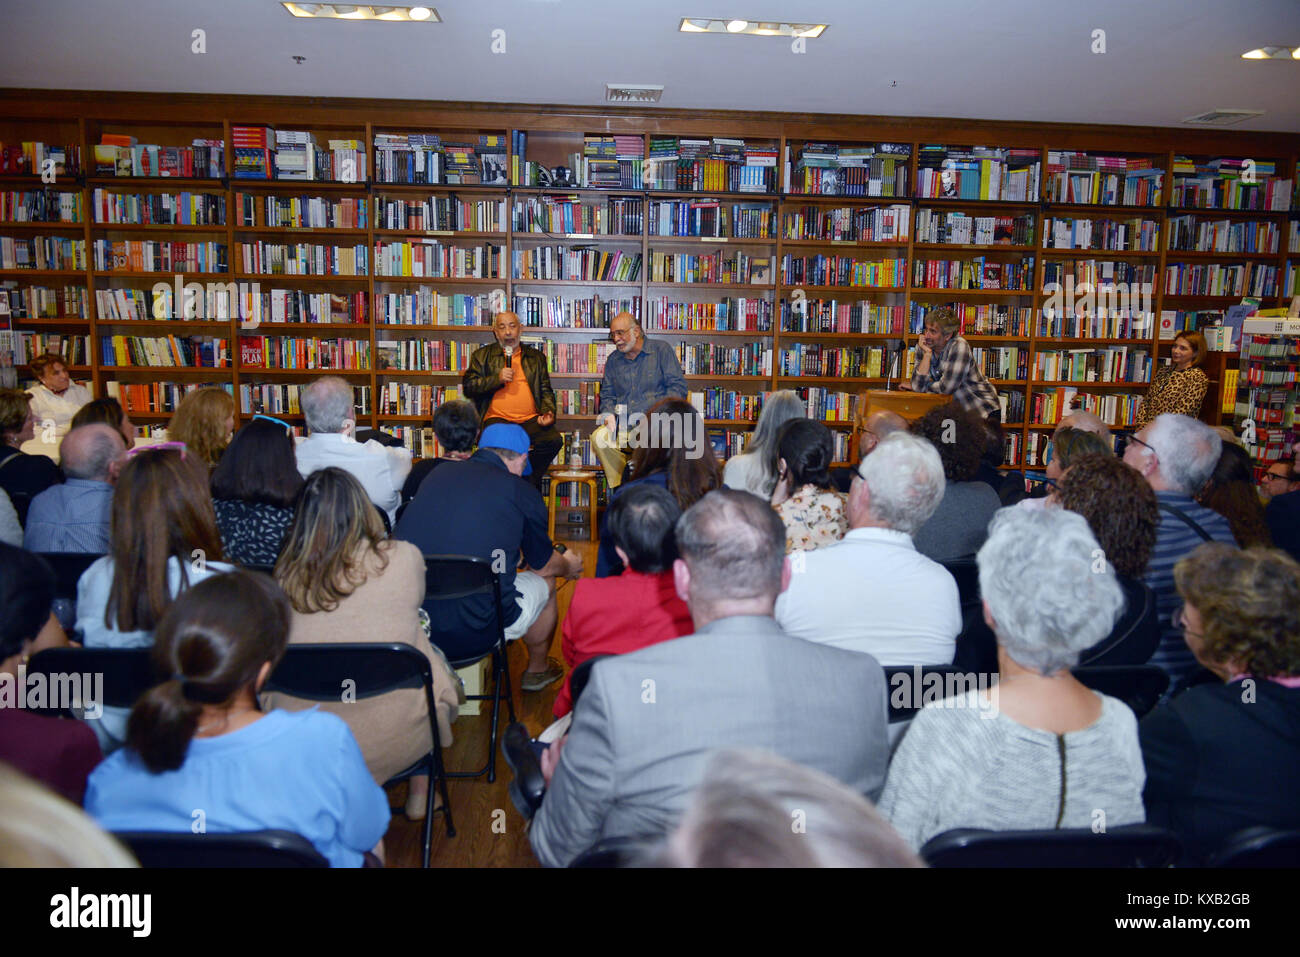 Coral Gables, FL, USA. 08th Jan, 2018. International Cuban novelist and journalist Leonardo Padura in conversation and book singing with actor and producer Nat Chediak at Books & Books on January 8, 2018 in Coral Gables, Florida. Credit: Mpi10/Media Punch/Alamy Live News Stock Photo